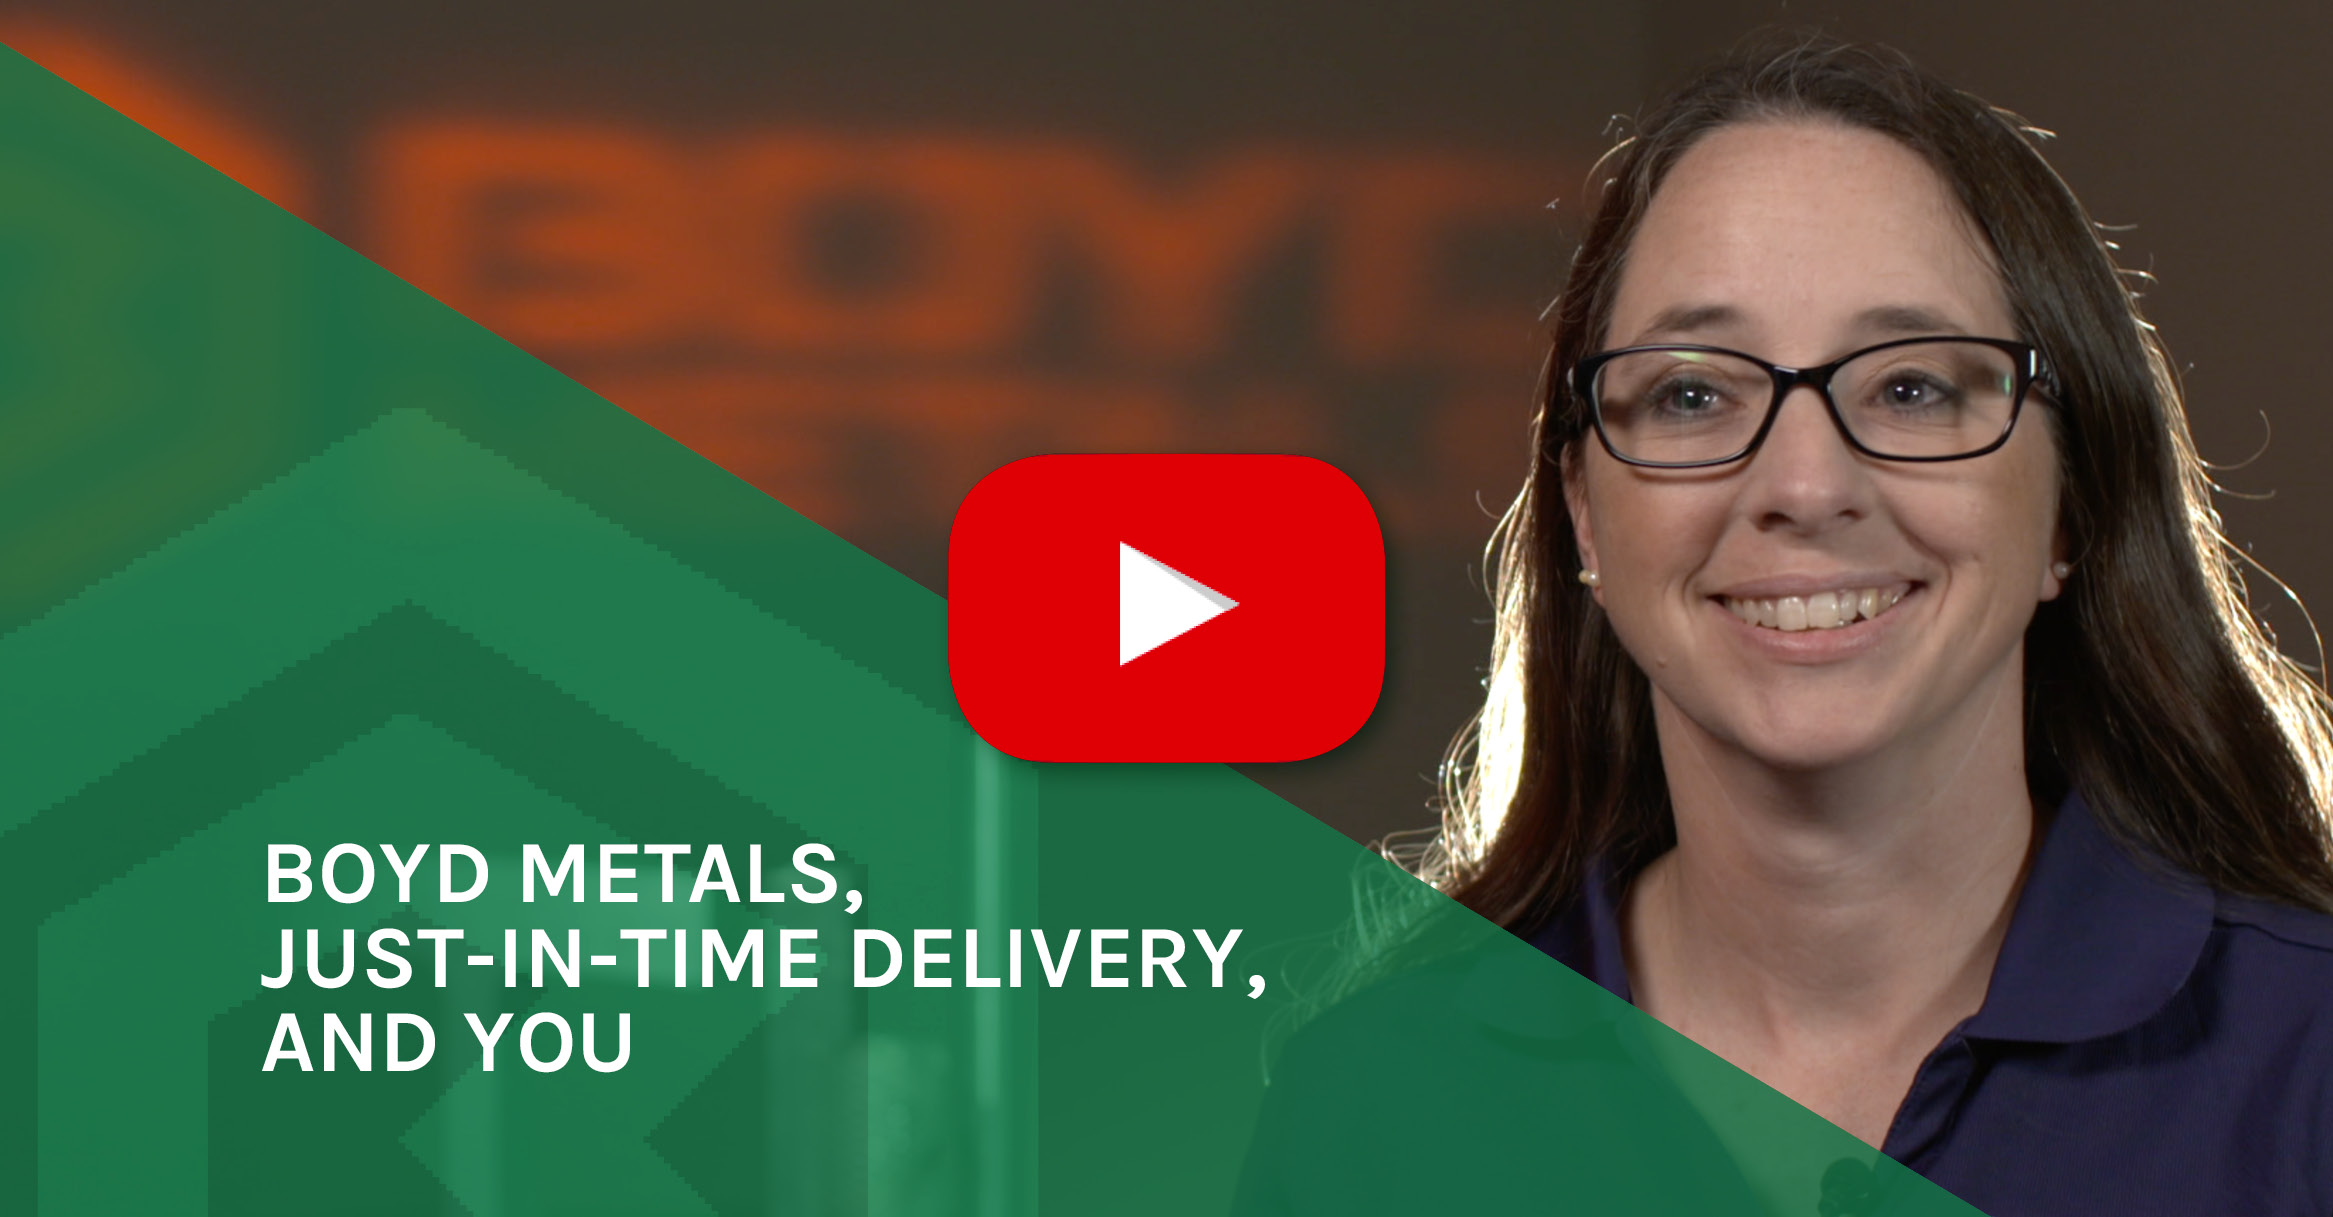 Boyd Metals, Just-In-Time Delivery, and You